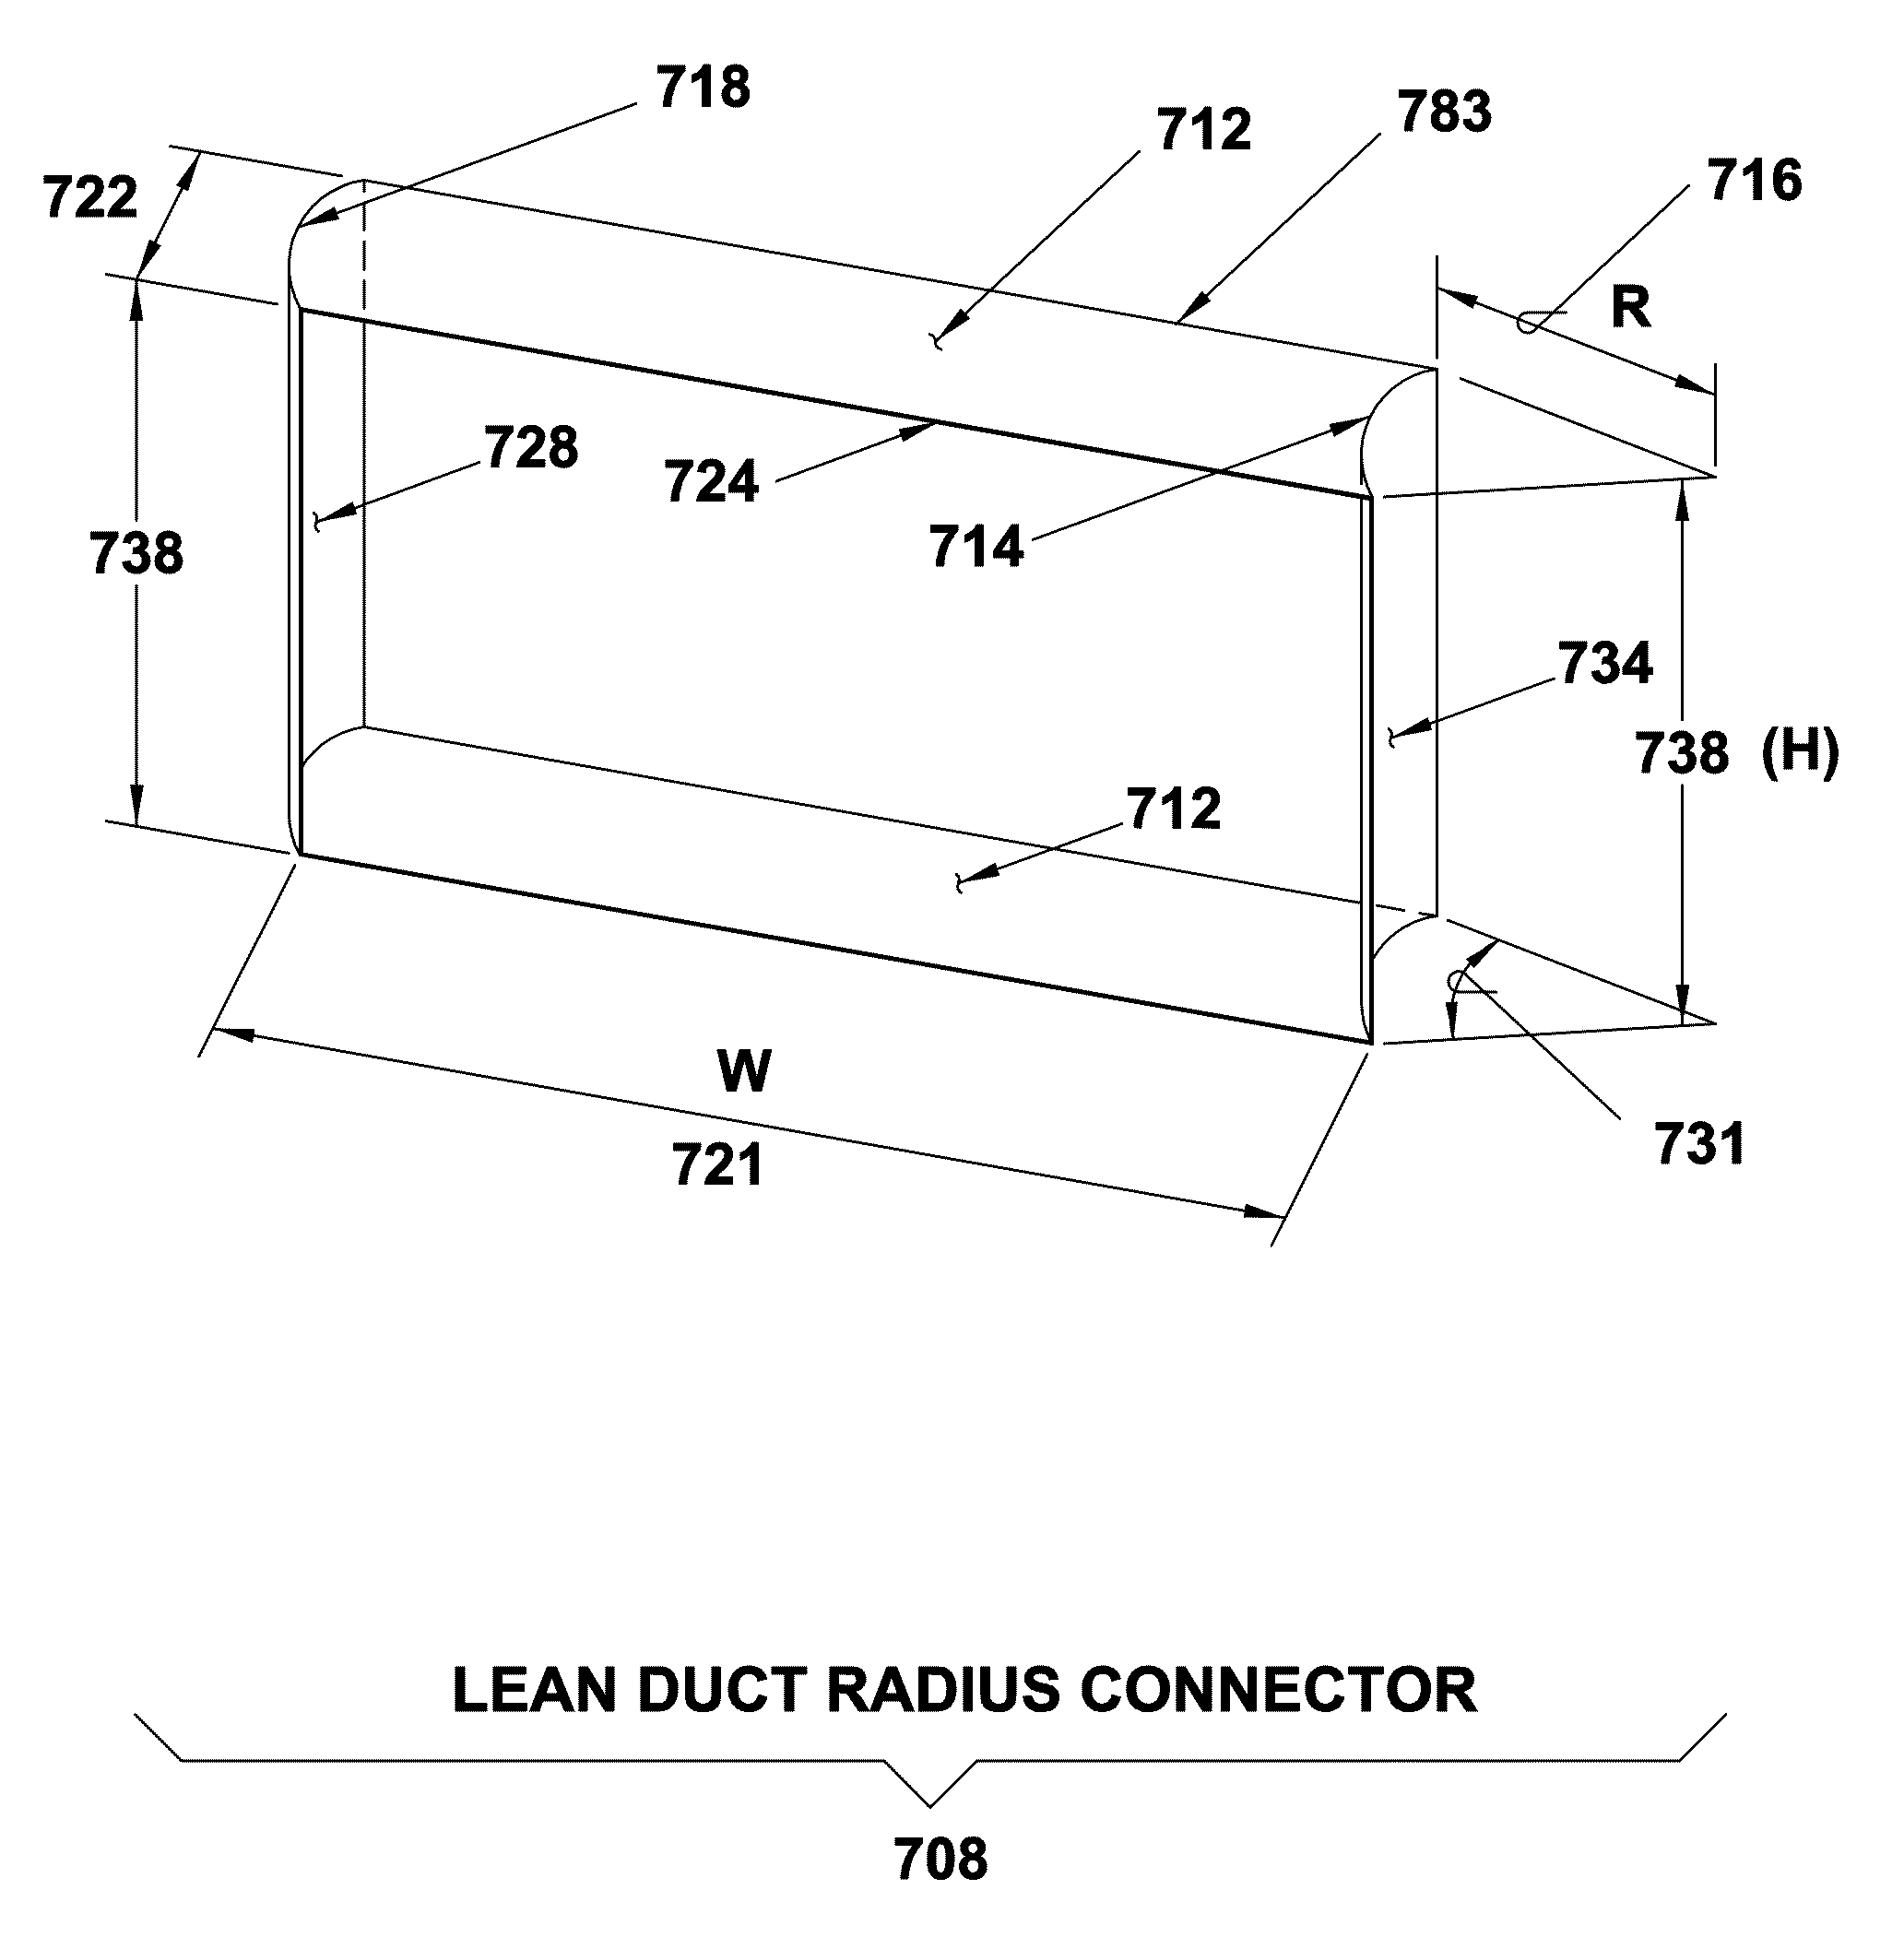 Lean duct fabrication